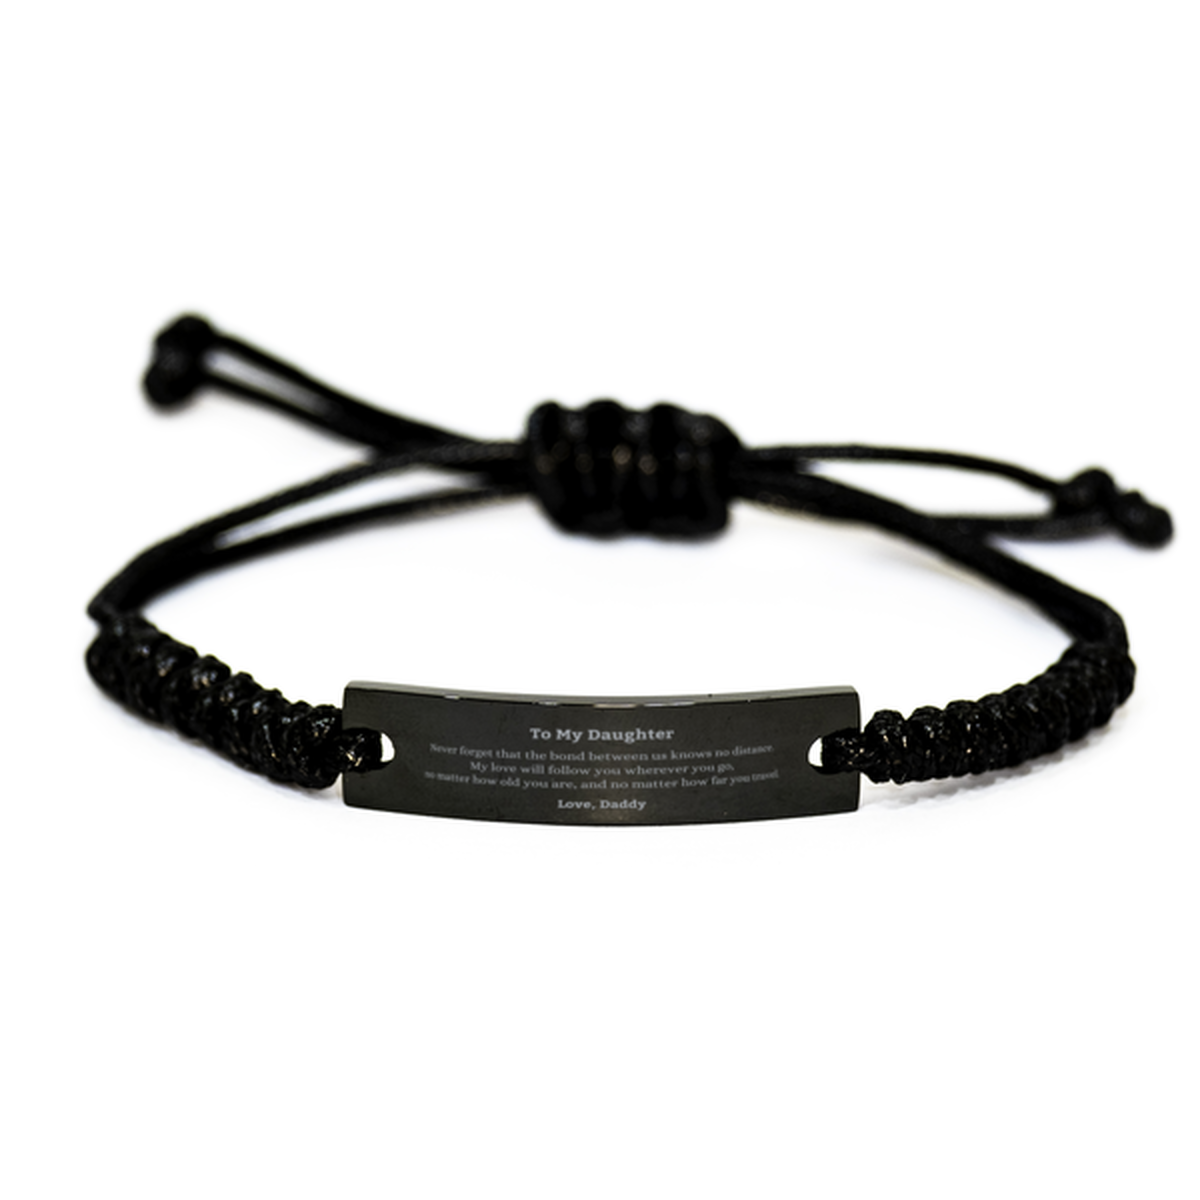 Daughter Birthday Gifts from Daddy, Adjustable Black Rope Bracelet for Daughter Christmas Graduation Unique Gifts Daughter Never forget that the bond between us knows no distance. Love, Daddy